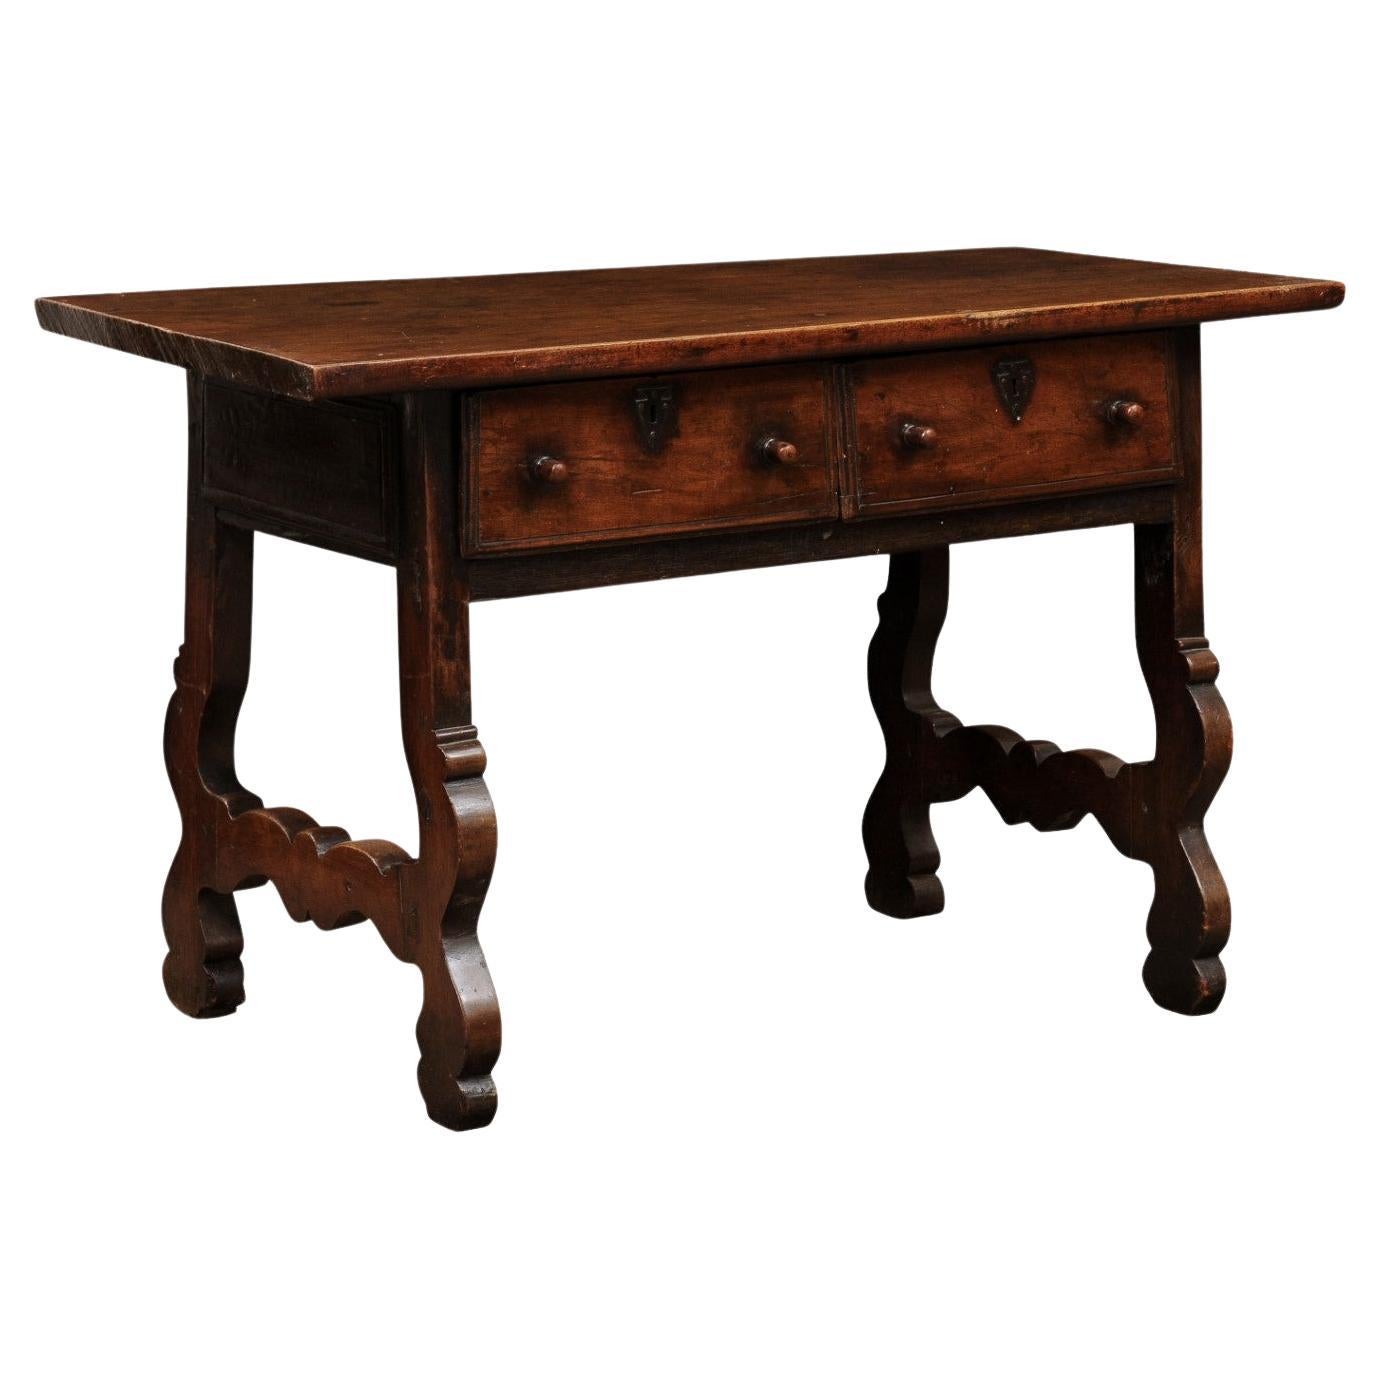 Spanish Walnut Console Table with 2 Drawers and Lyre Legs, Early 18th Century For Sale